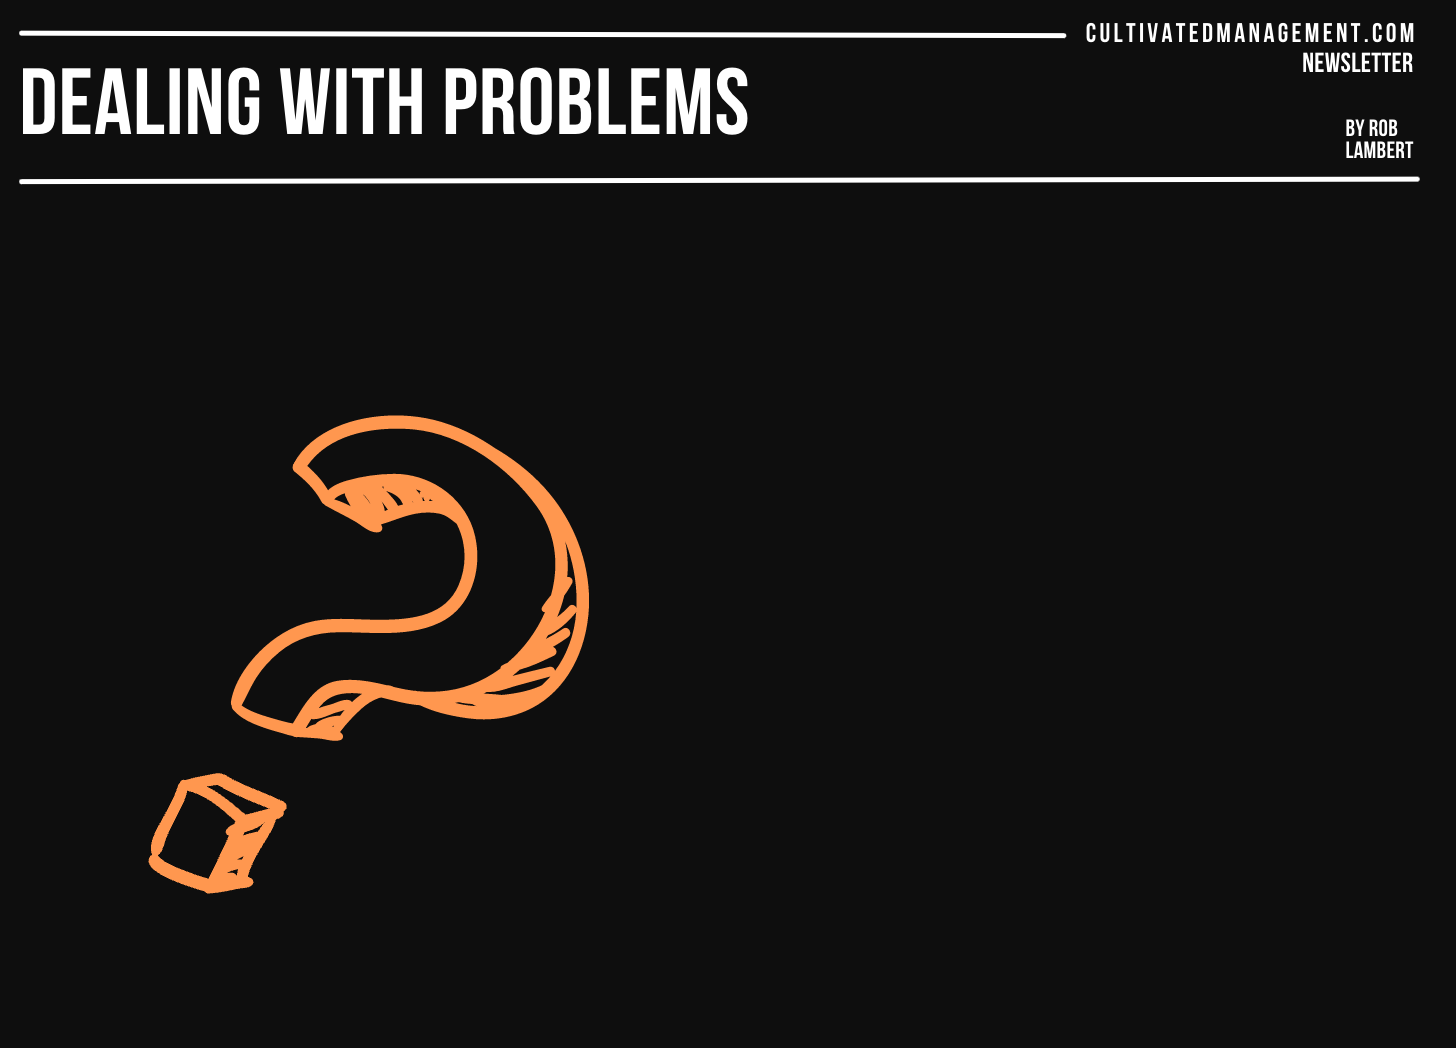 Dealing with problems - 6 clever ways to understand the problem